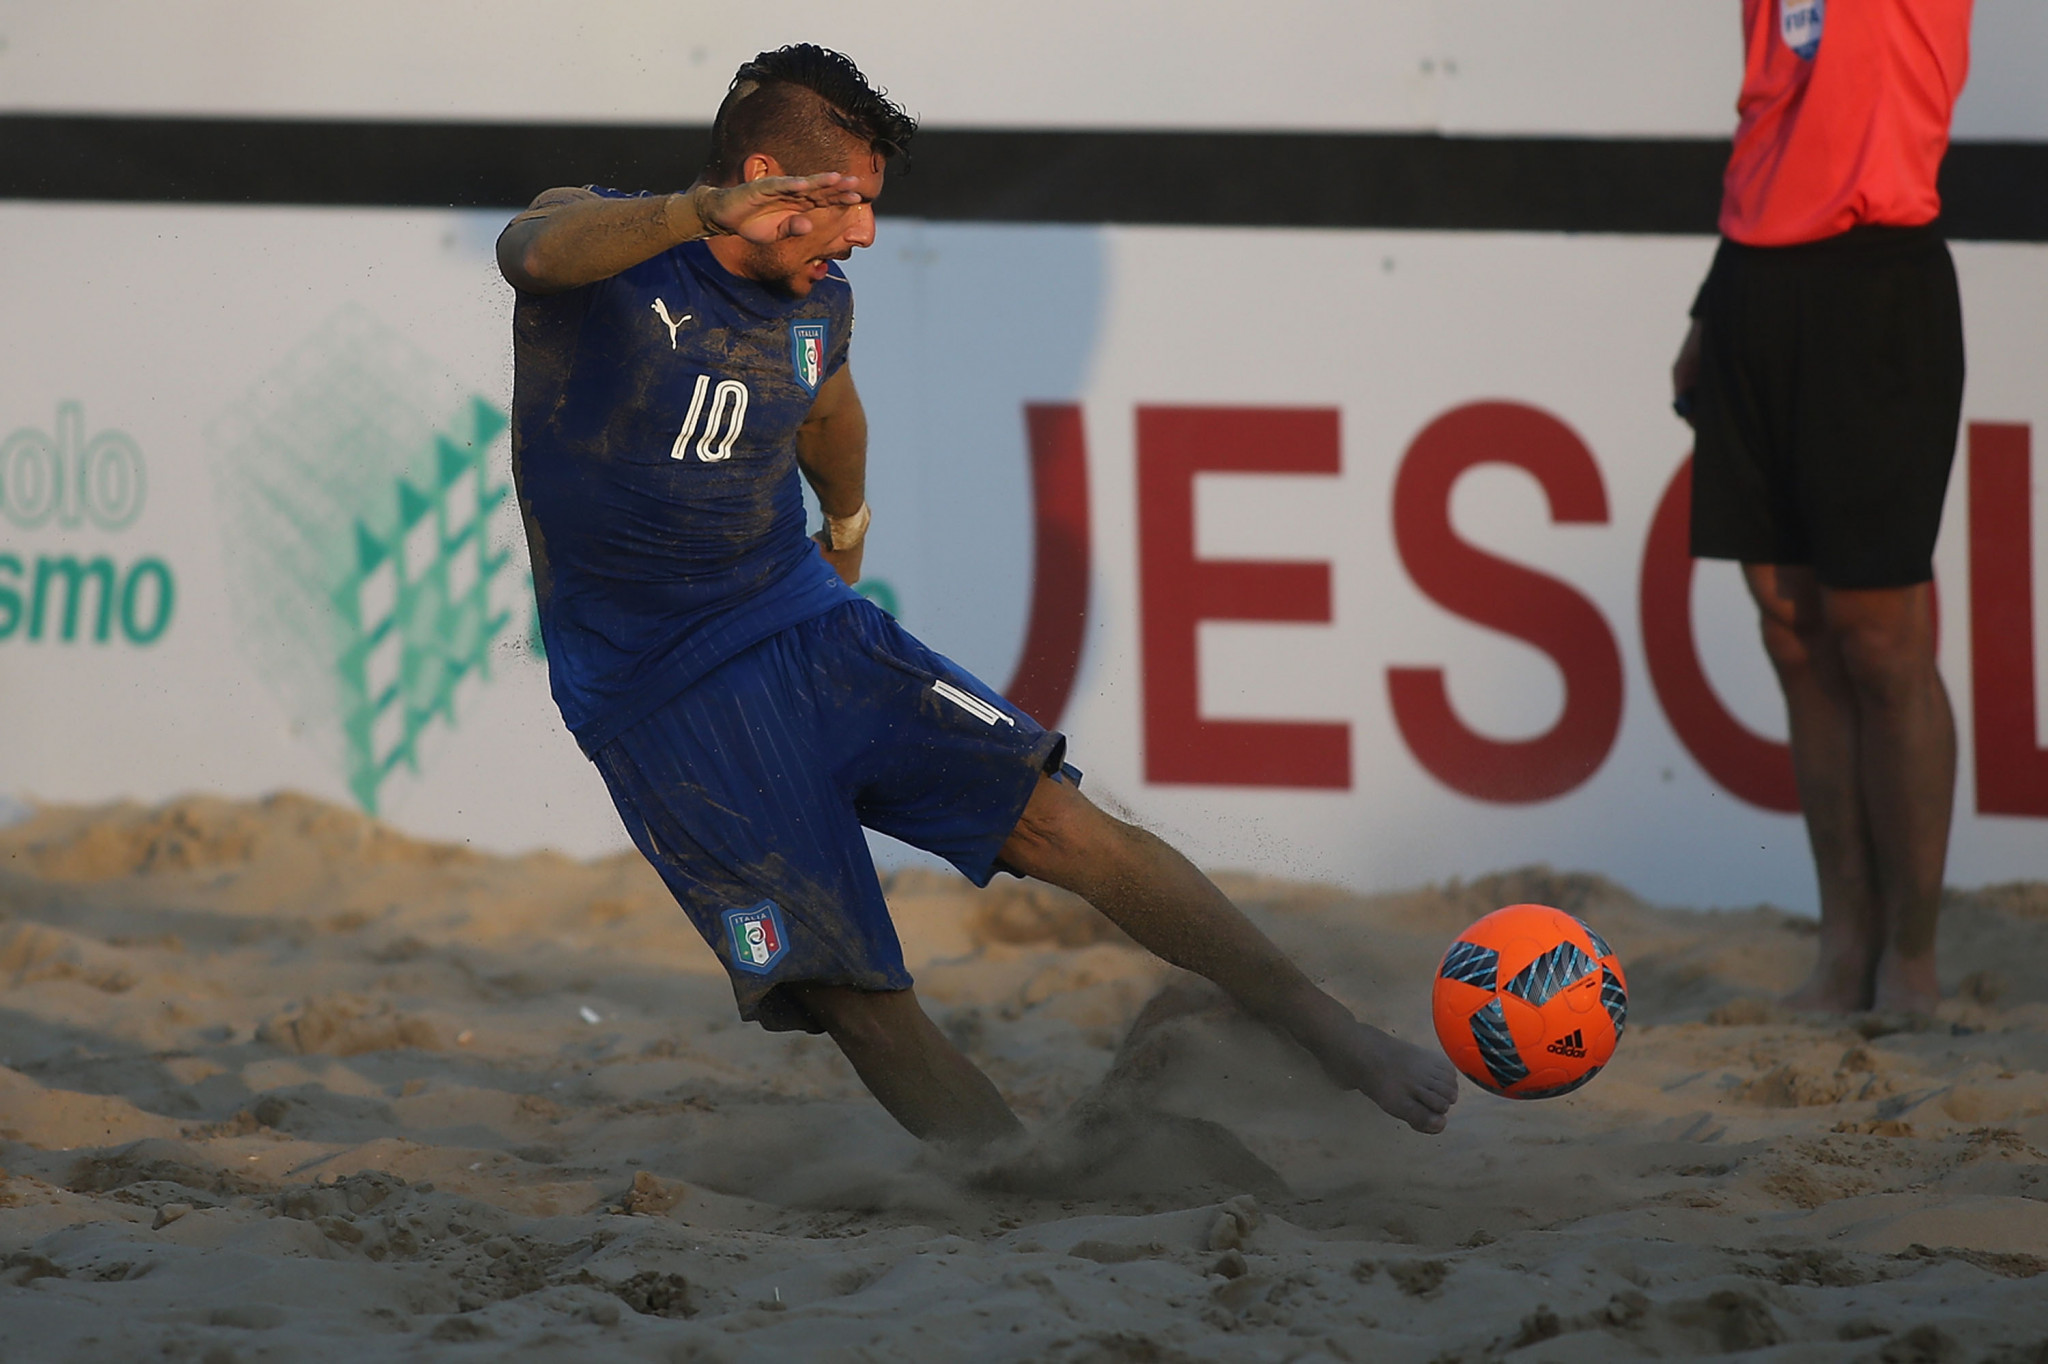 Portugal set to defend title at 2021 Beach Soccer World Cup